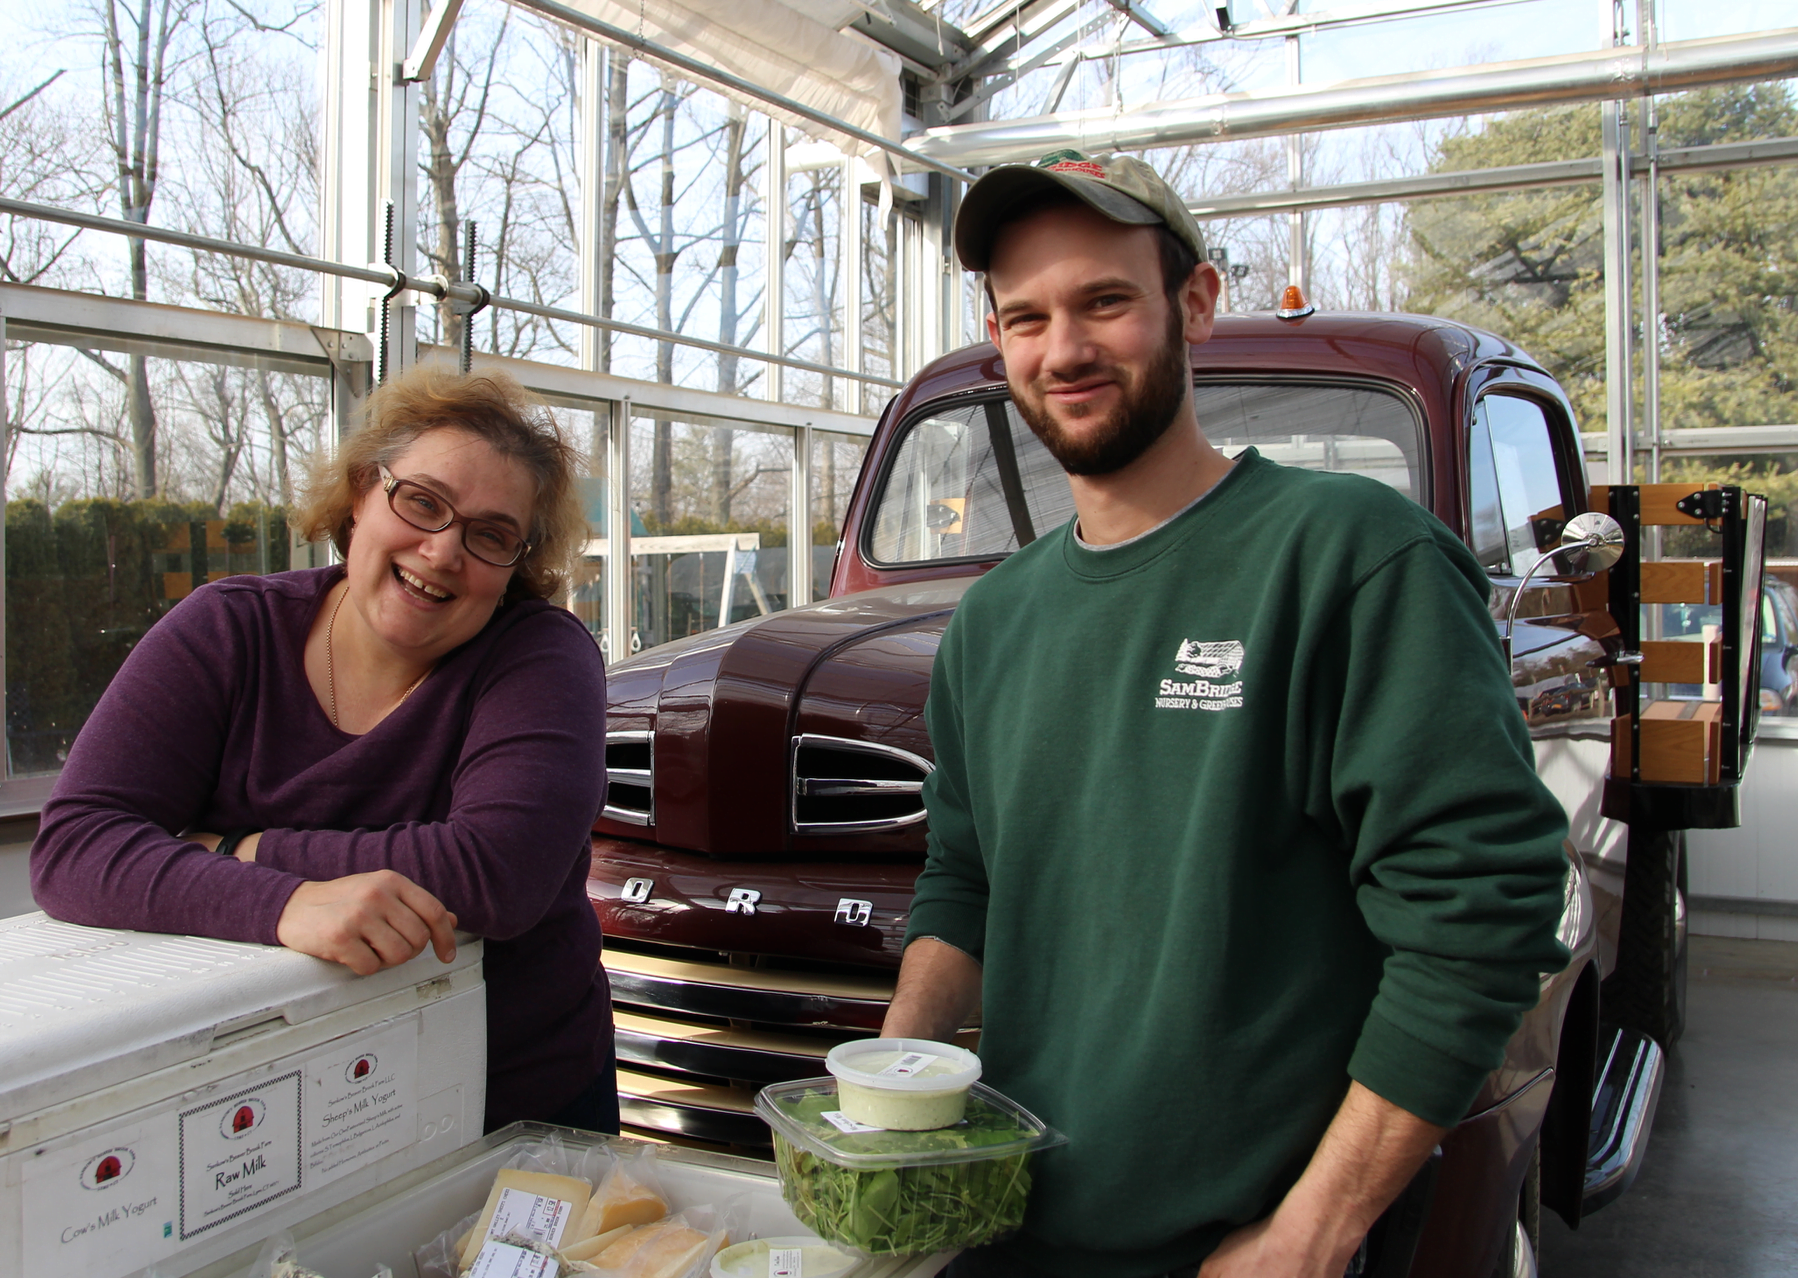 Victoria from Sankow's Beaver Brook Farm with Nick Bridge, manager of the winter farmers market. Photo: Leslie Yager